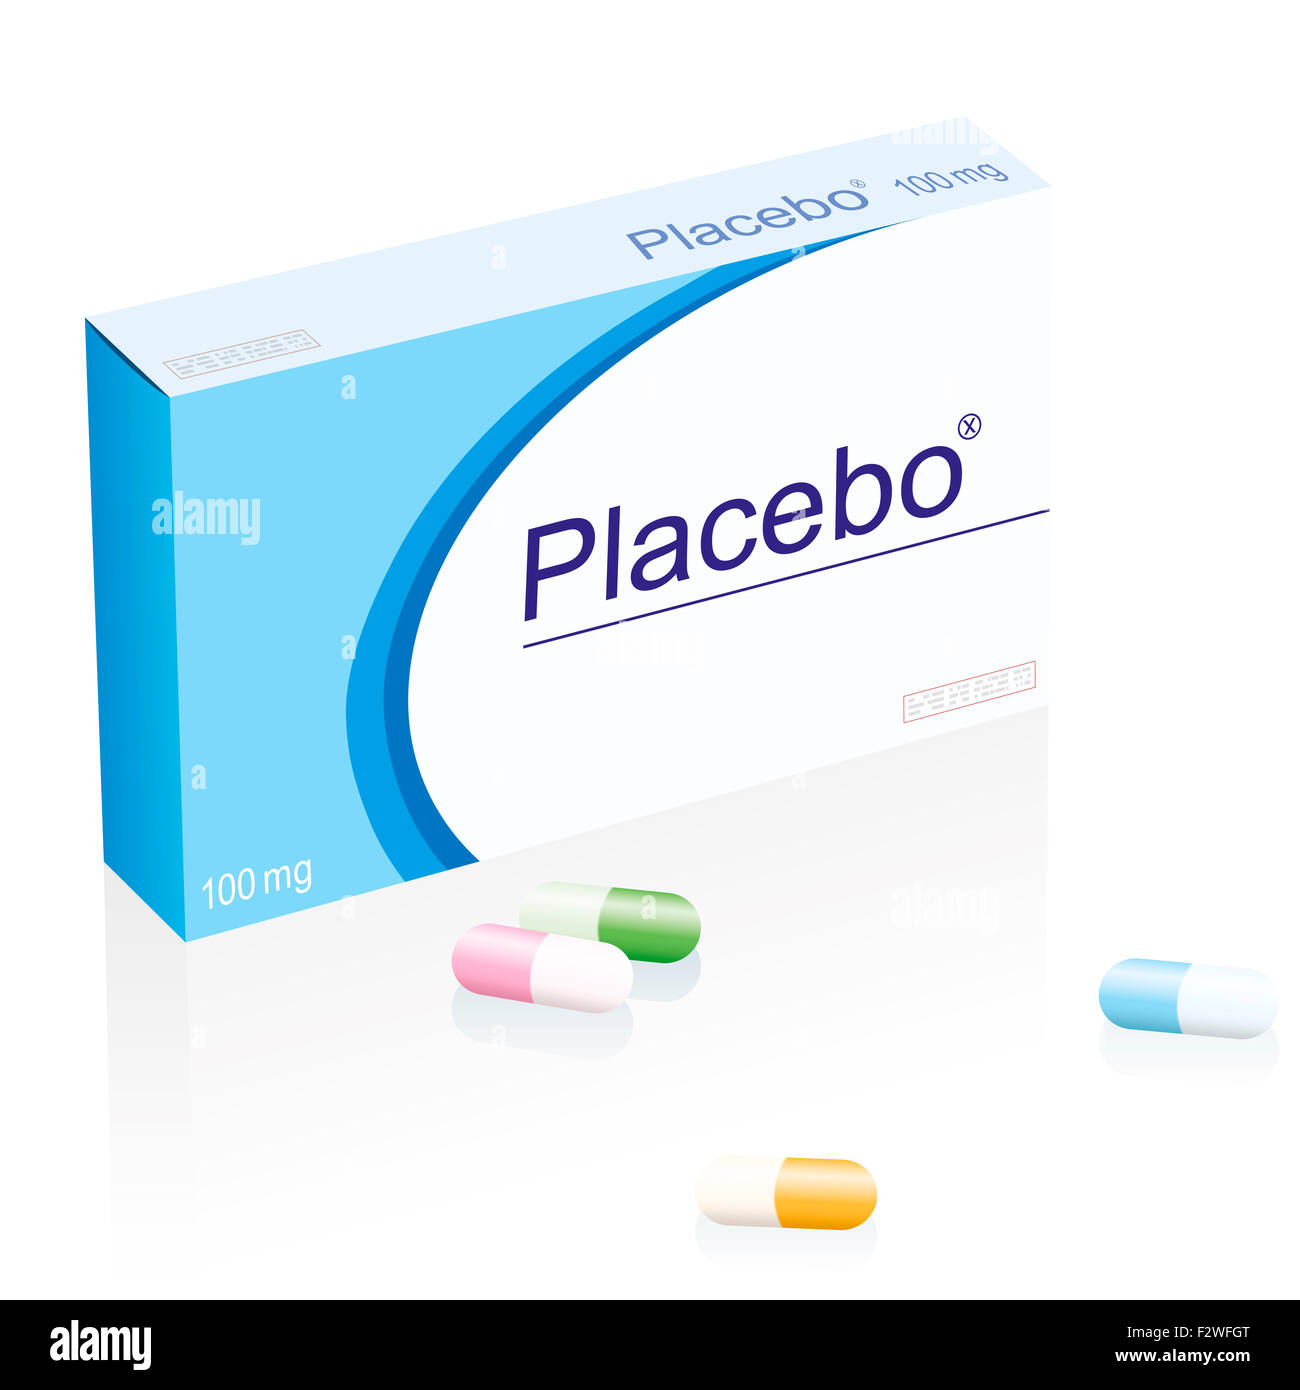 Placebo medicine package with colorful capsules, a medical fake product. Stock Photo